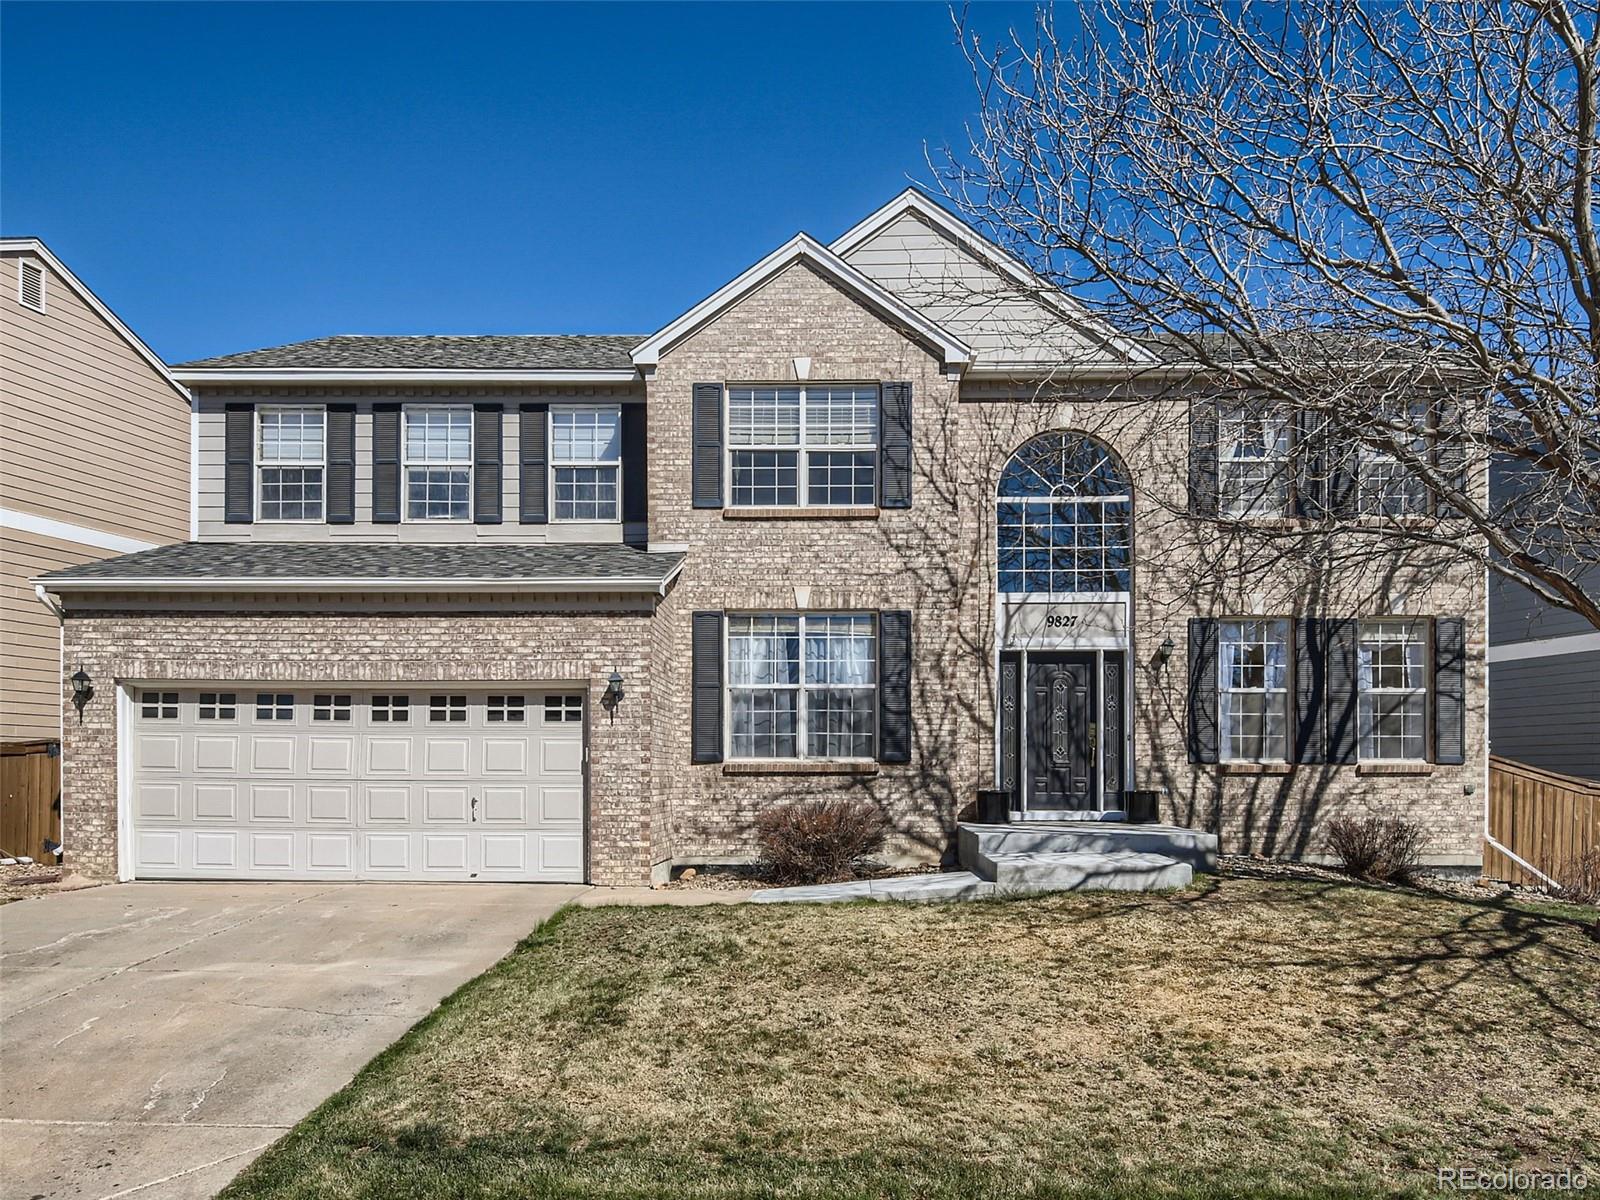 9827 Townsville Circle, Highlands Ranch, CO 80130 - #: 2843321